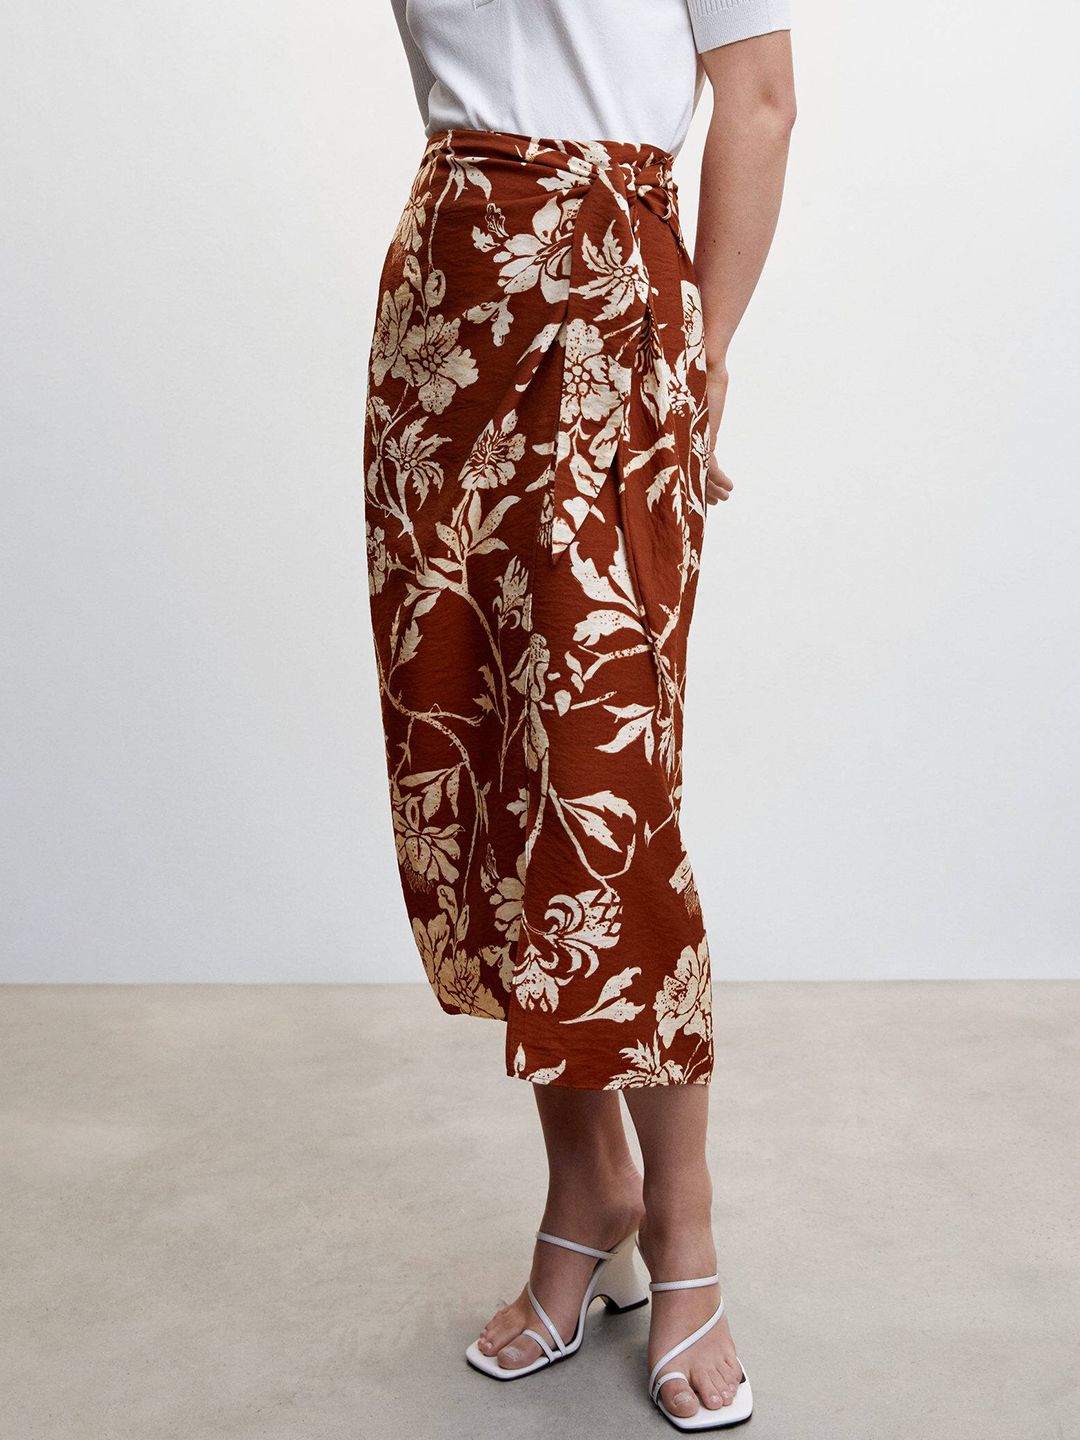 MANGO Women Floral Printed Midi A-line Skirt Price in India